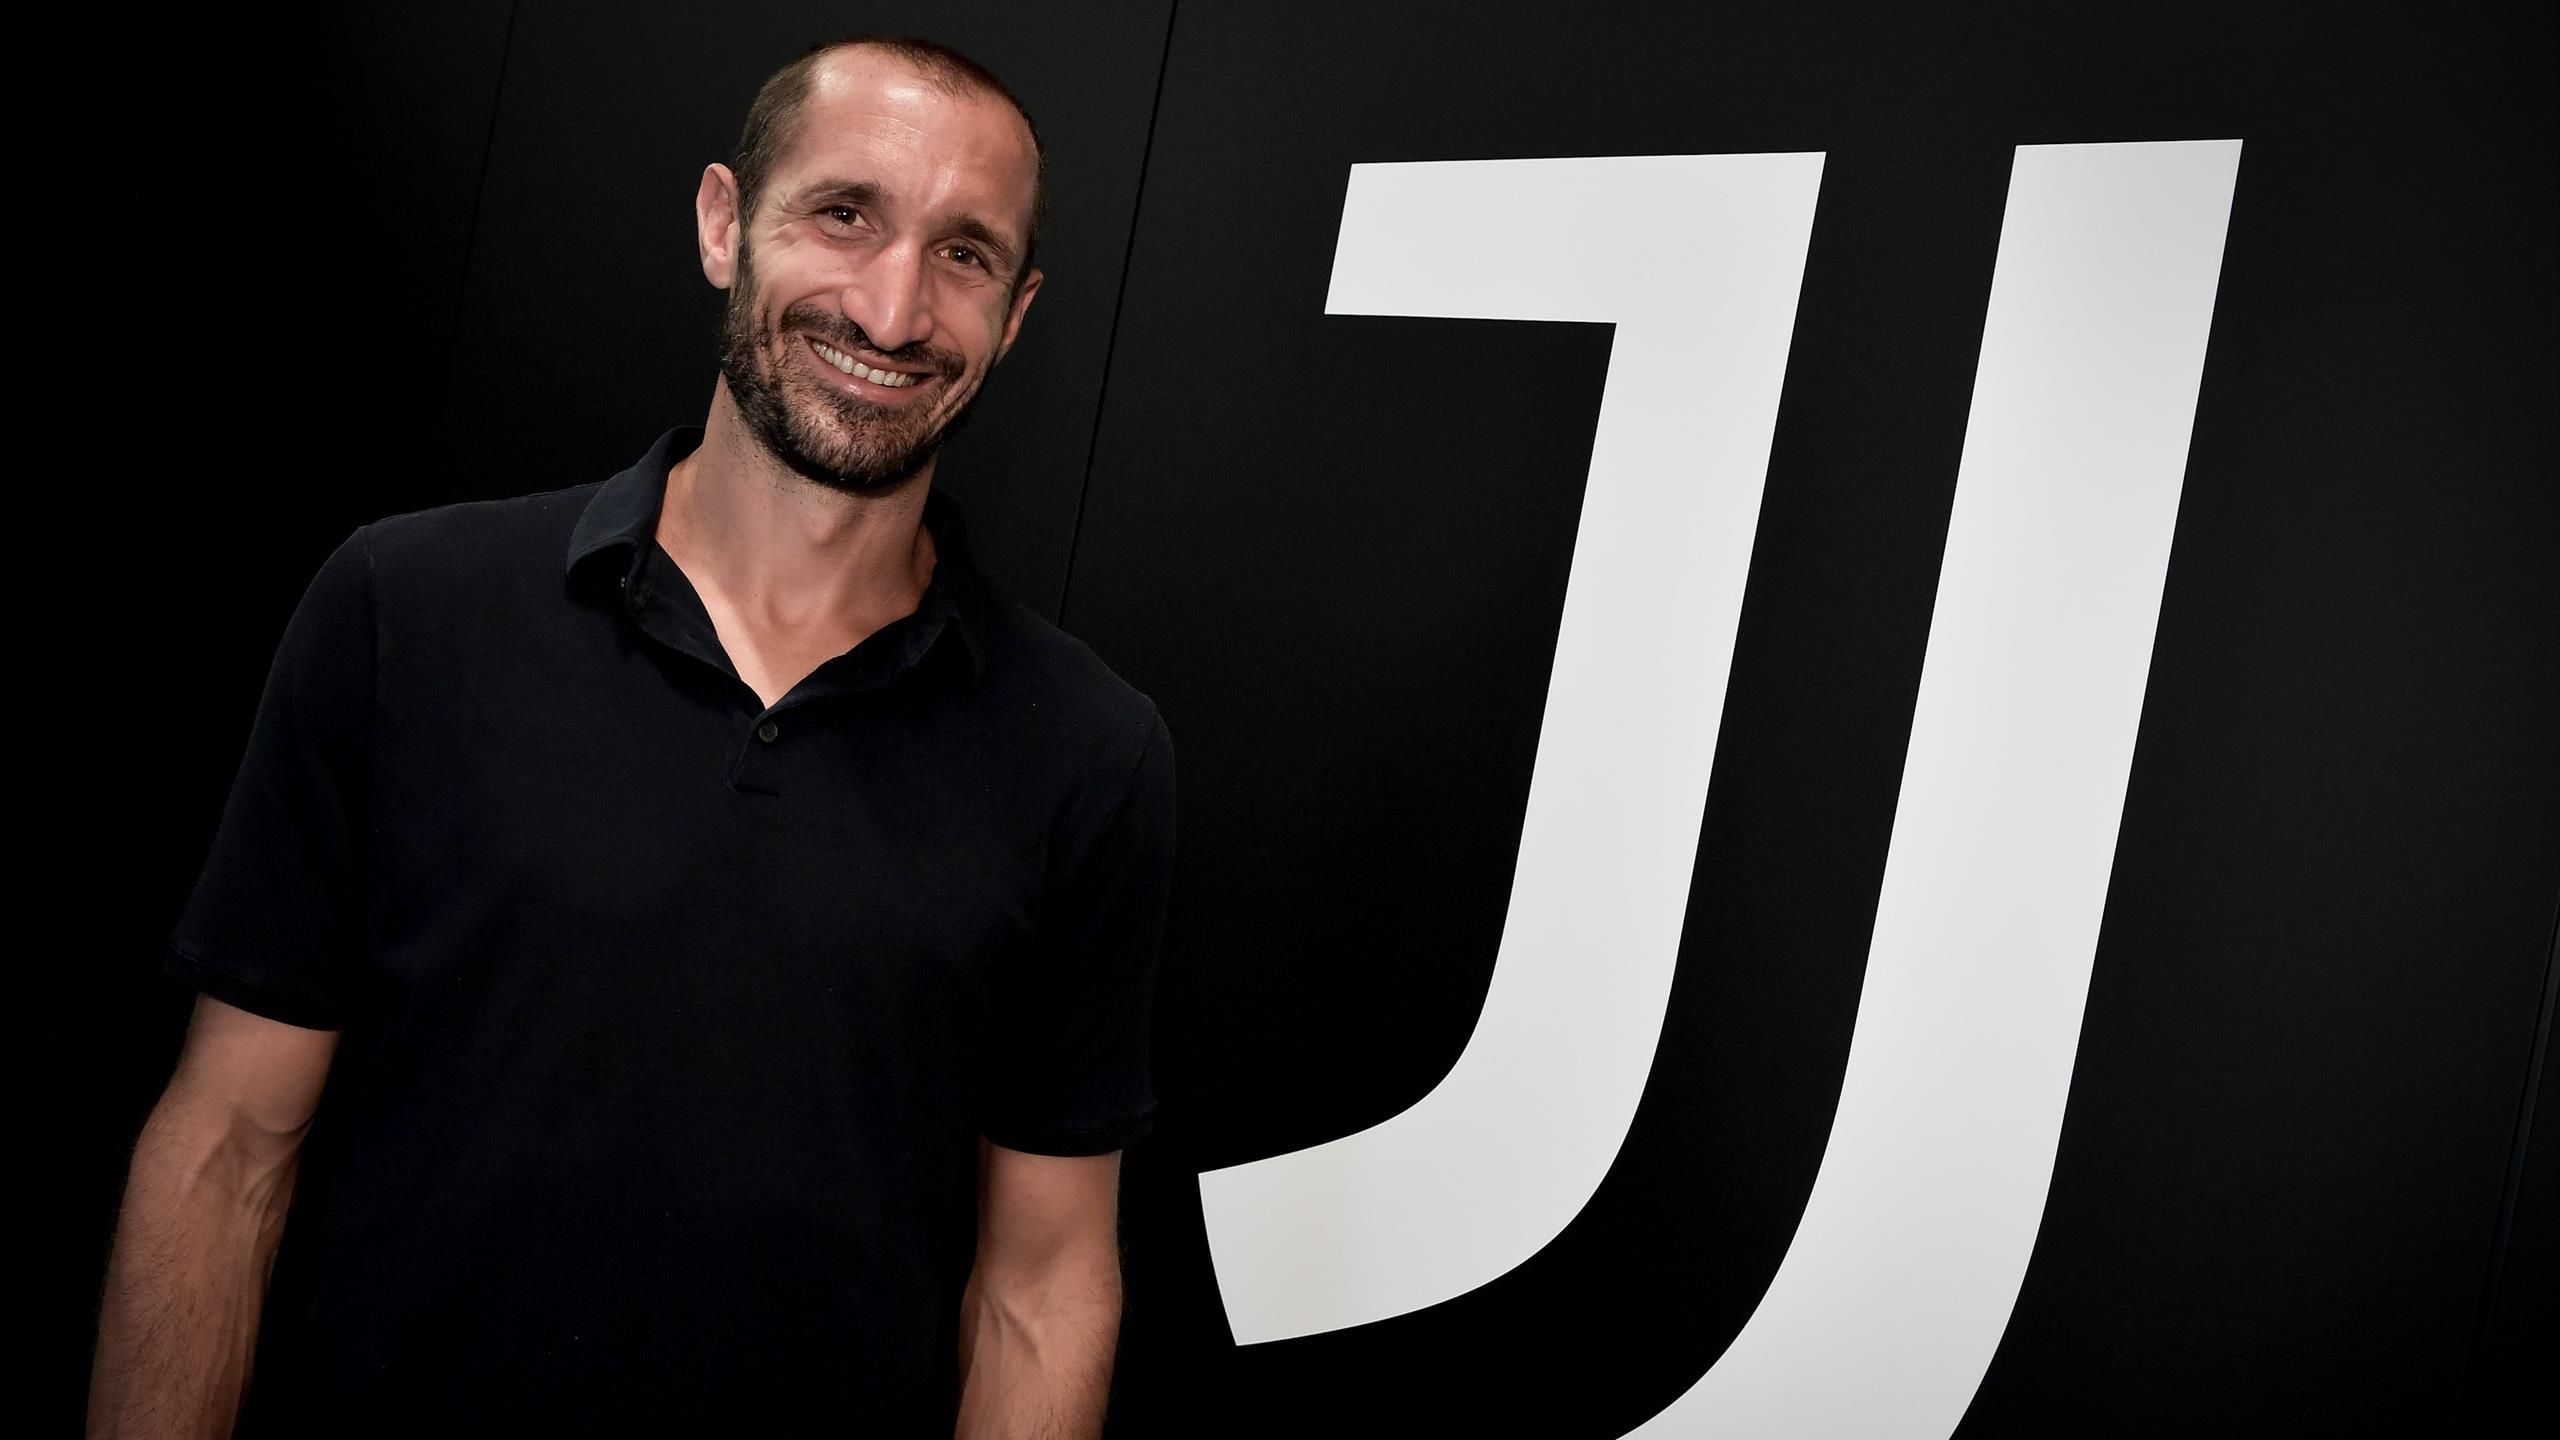 Italian veteran Chiellini excited to join young LAFC roster